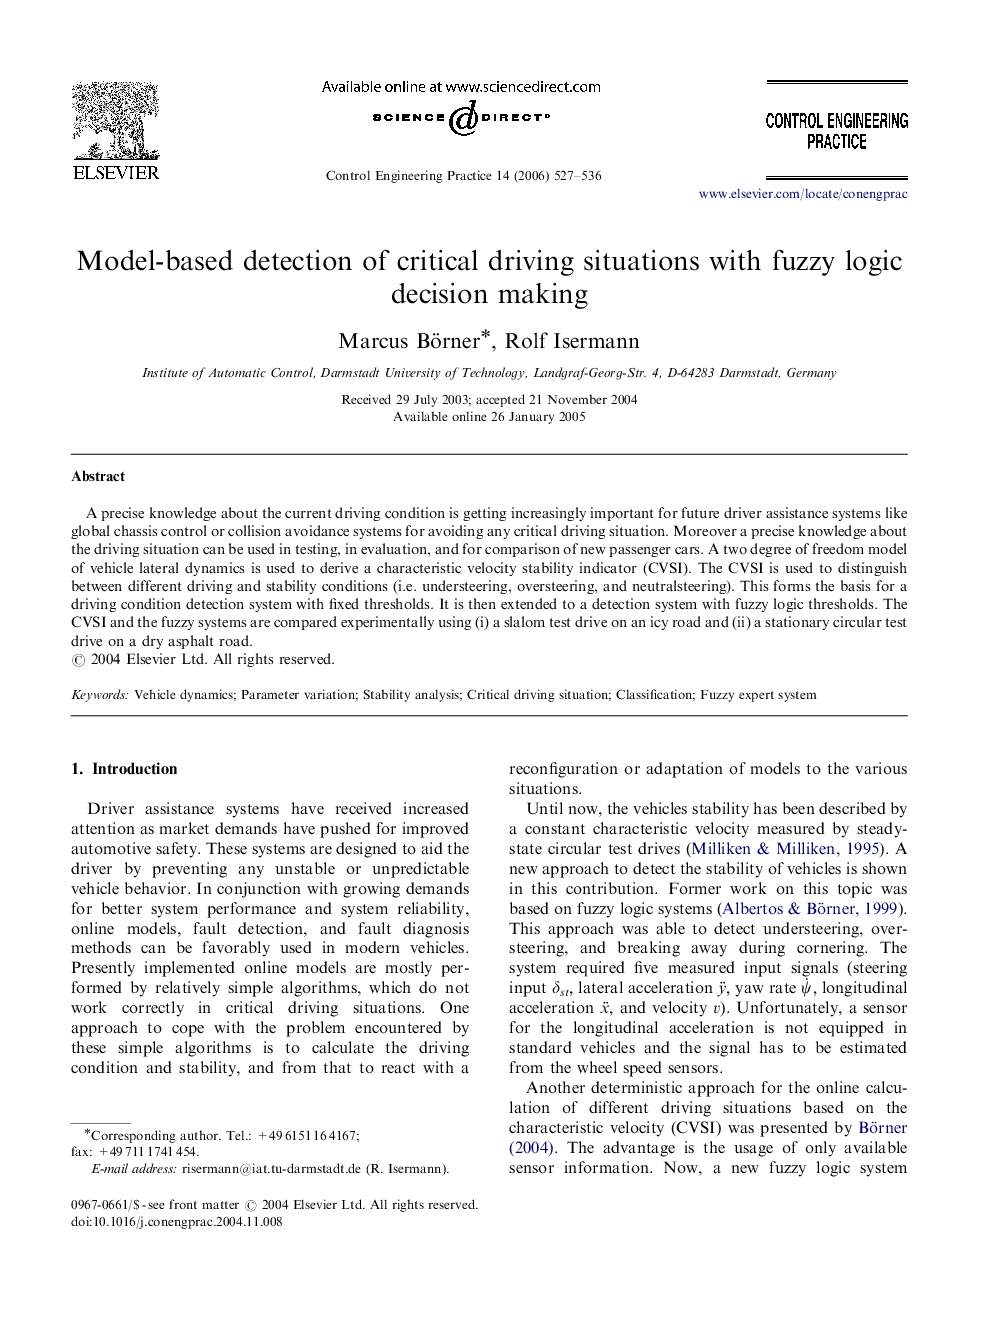 Model-based detection of critical driving situations with fuzzy logic decision making